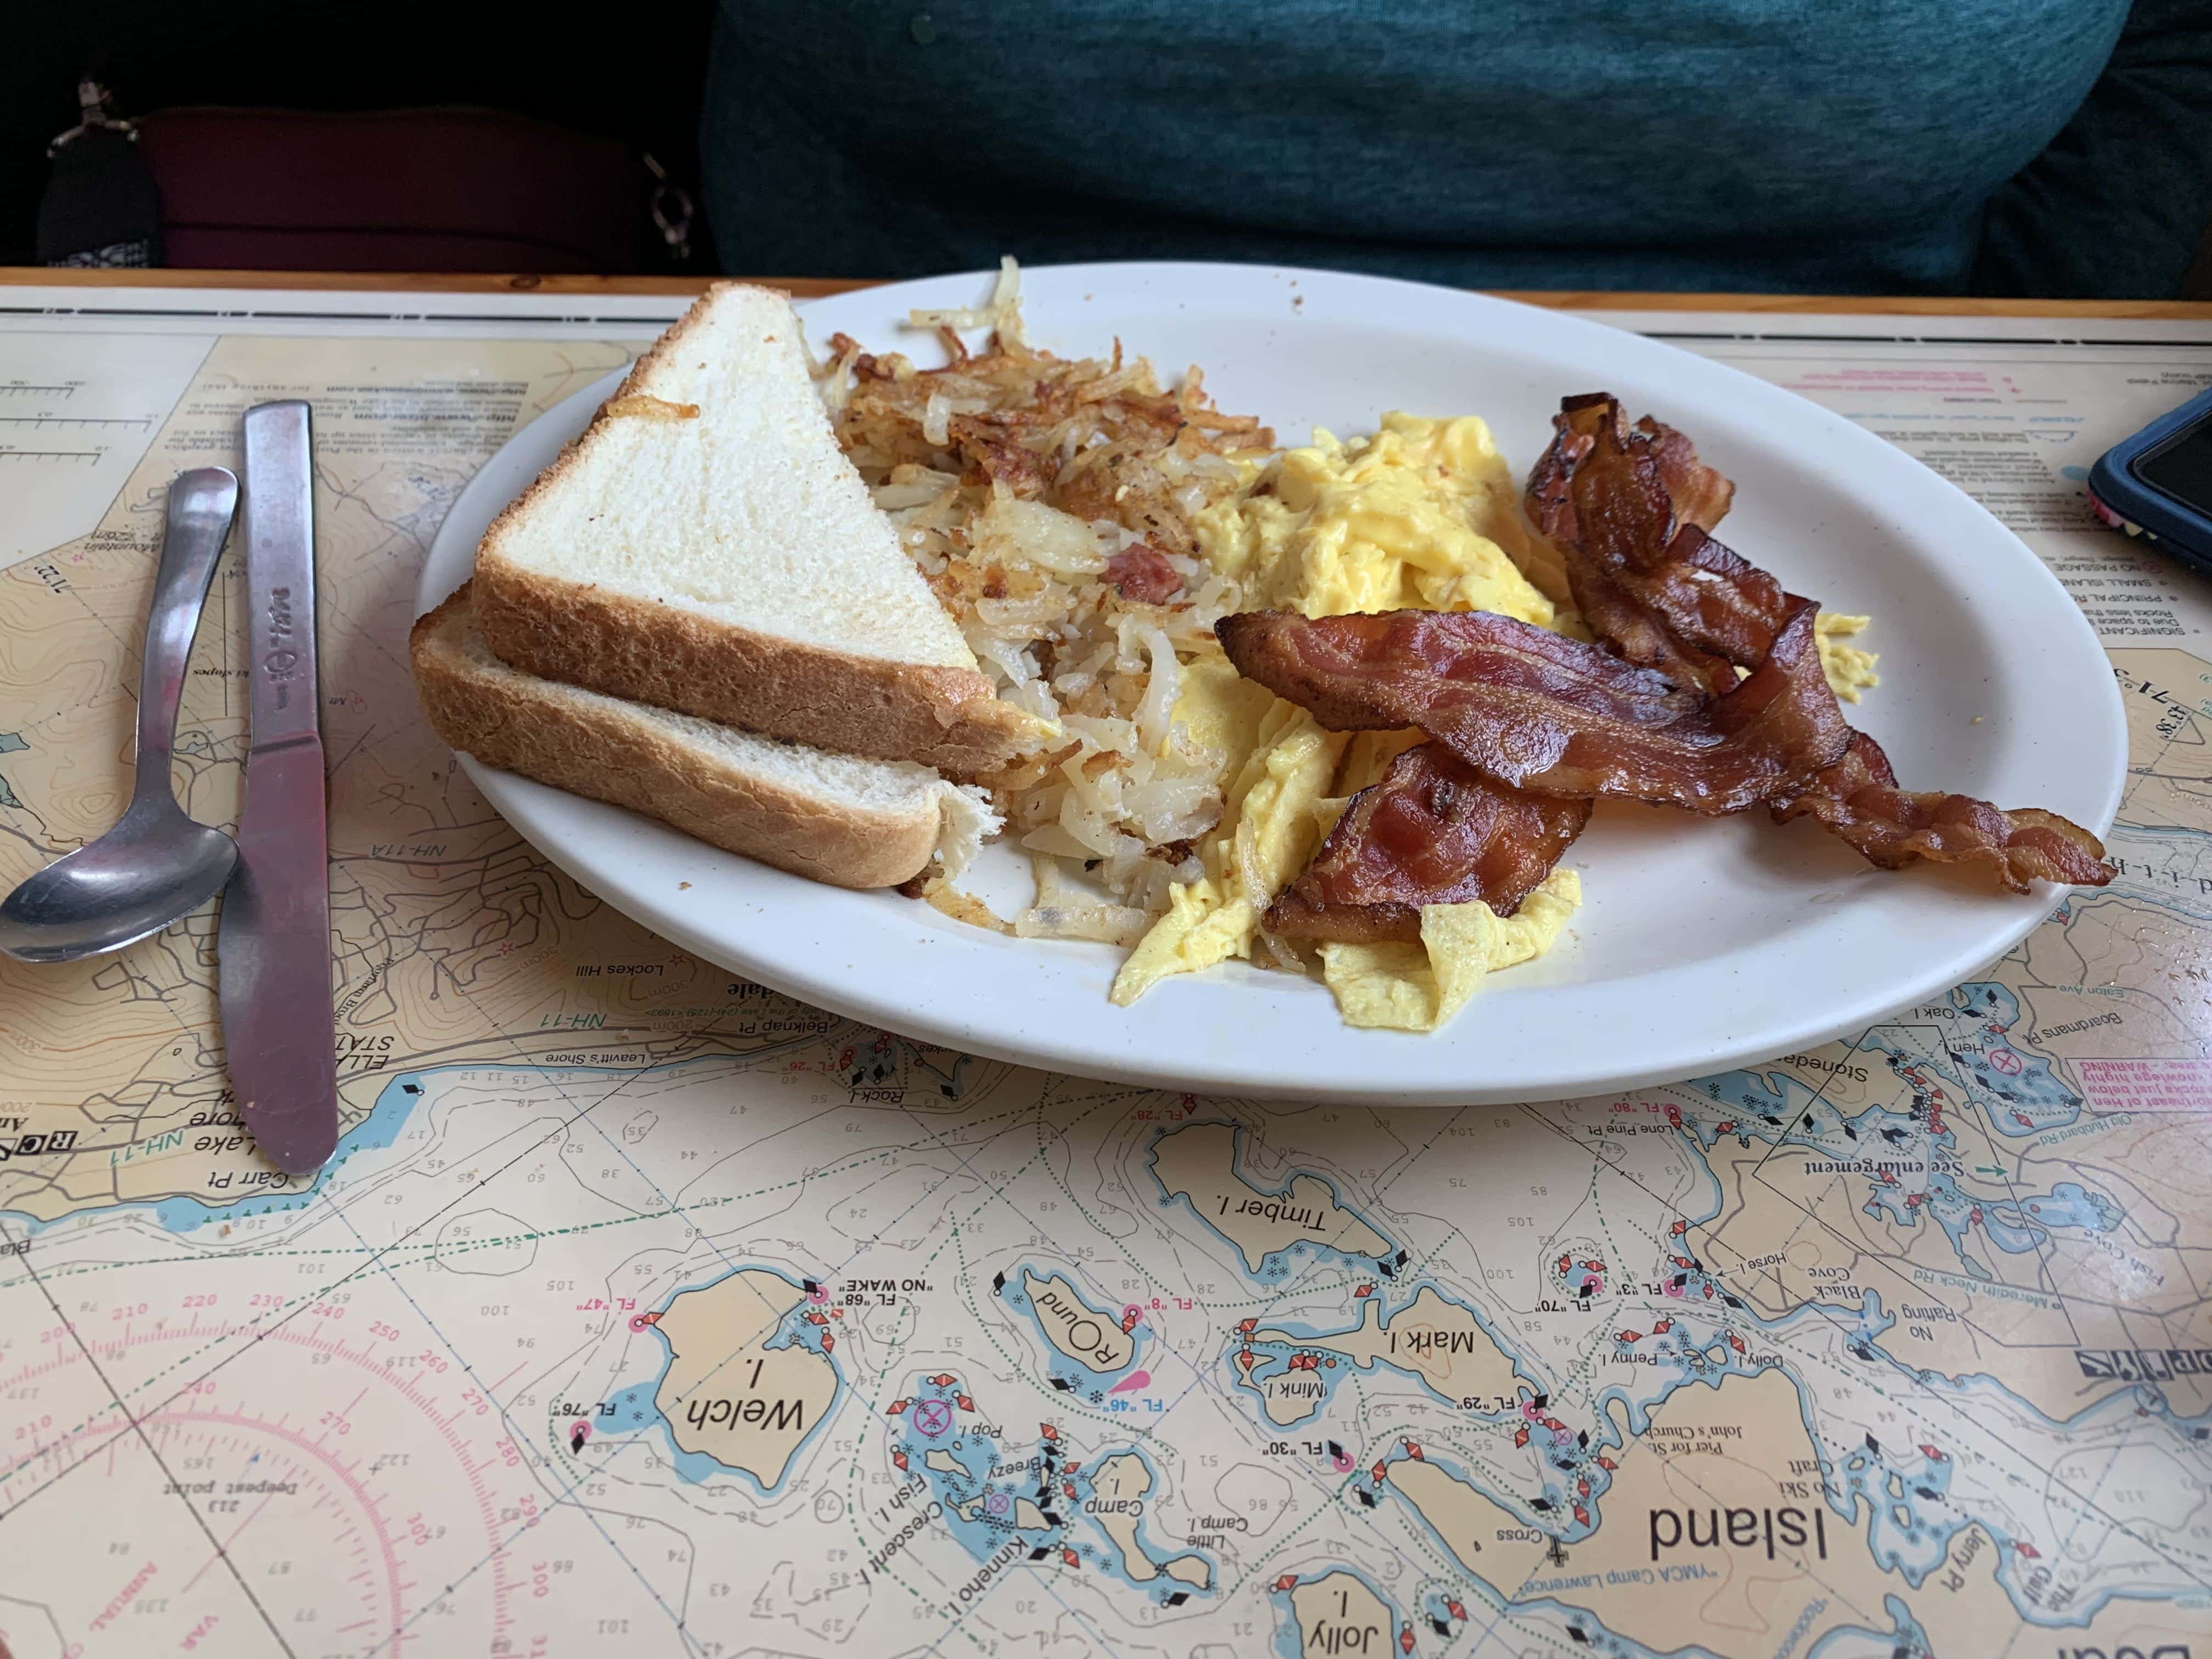 Bayside Diner and Eatery - Alton Bay, NH, US, all you can eat near me